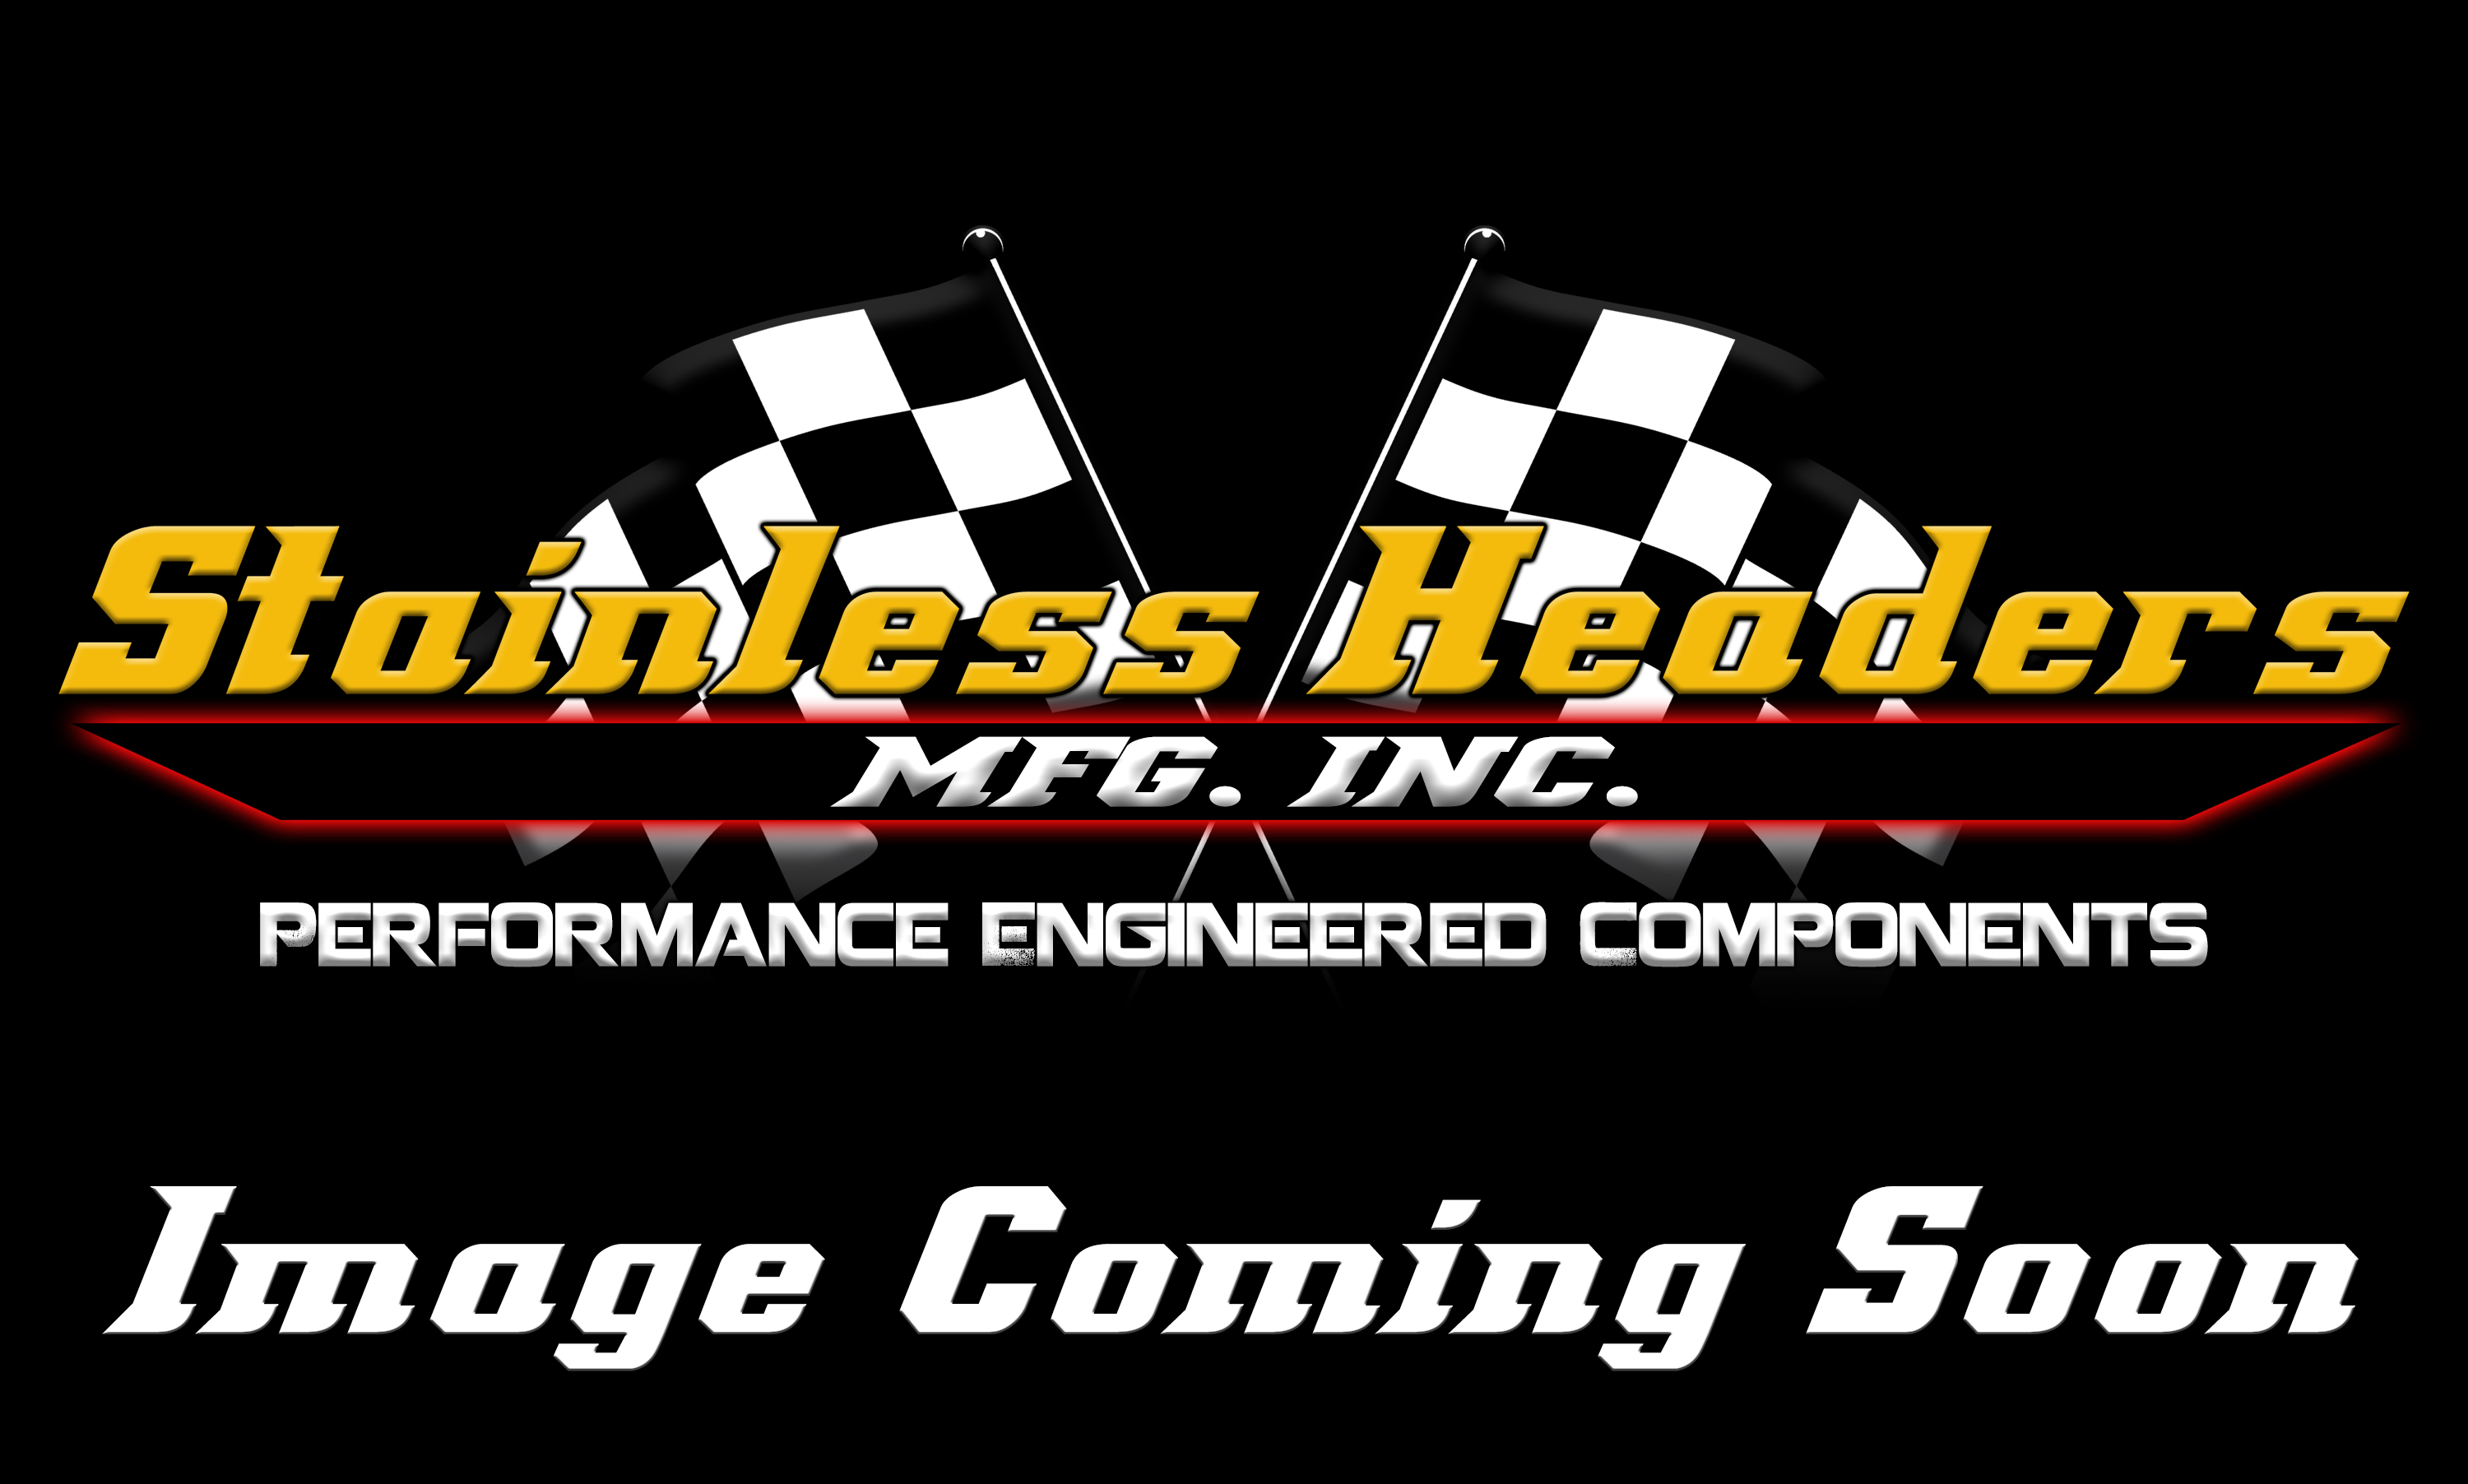 CompTurbo Technology Turbochargers - Comp Turbo Journal Bearing Turbochargers - CompTurbo Technologies - CTR3593S-6262 360 Journal Bearing Turbocharger (800 HP)